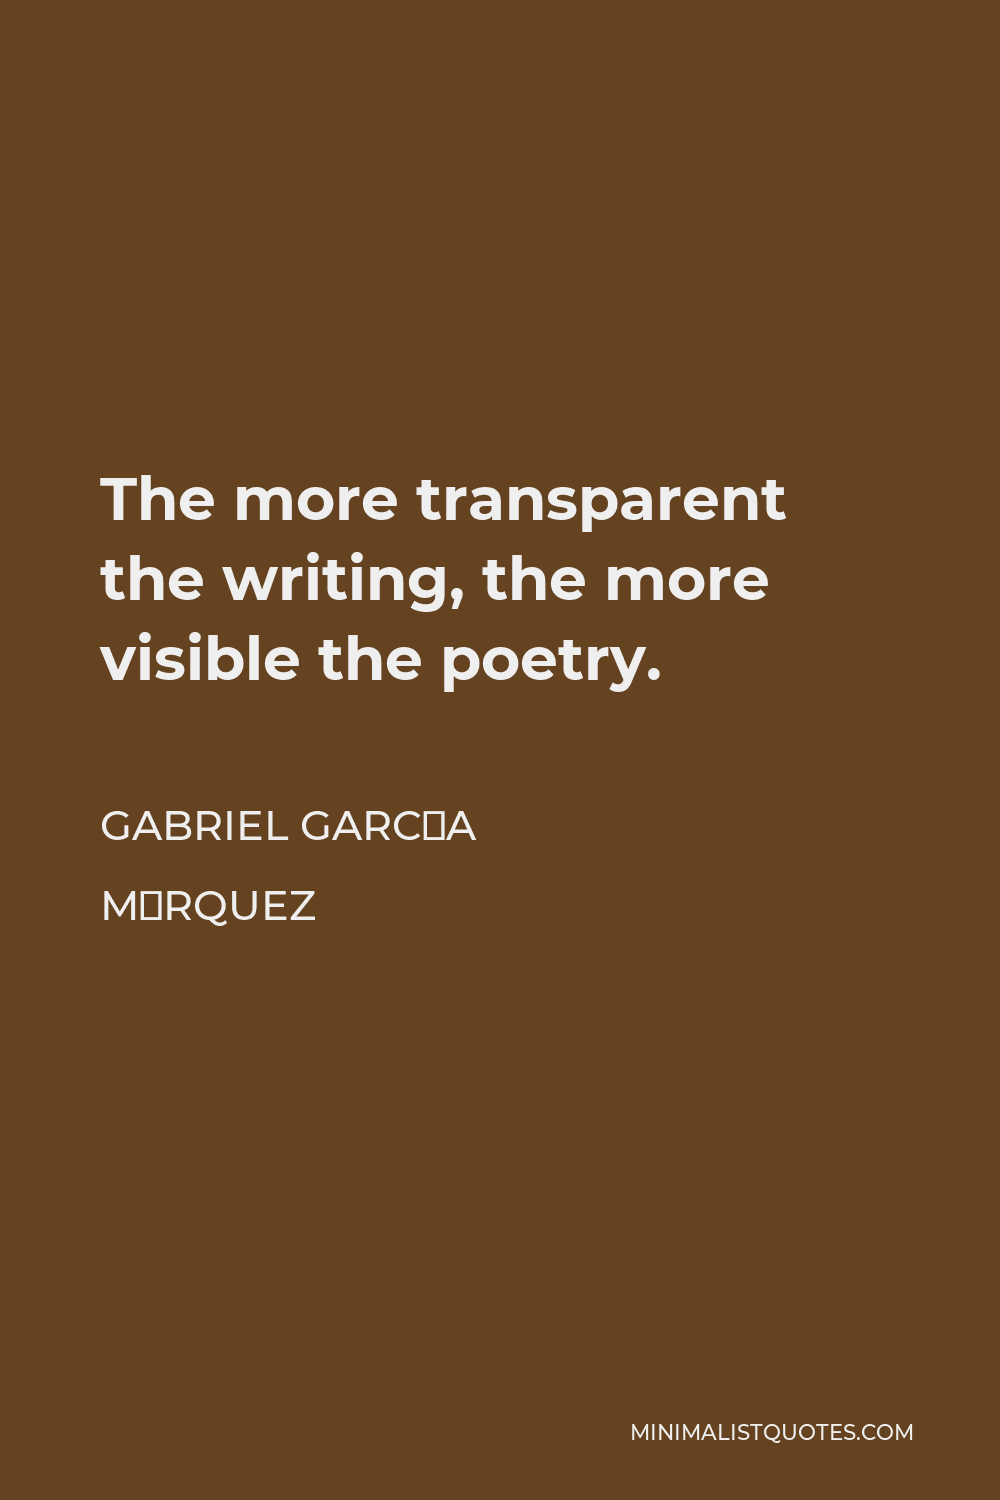 Gabriel García Márquez Quote - The more transparent the writing, the more visible the poetry.